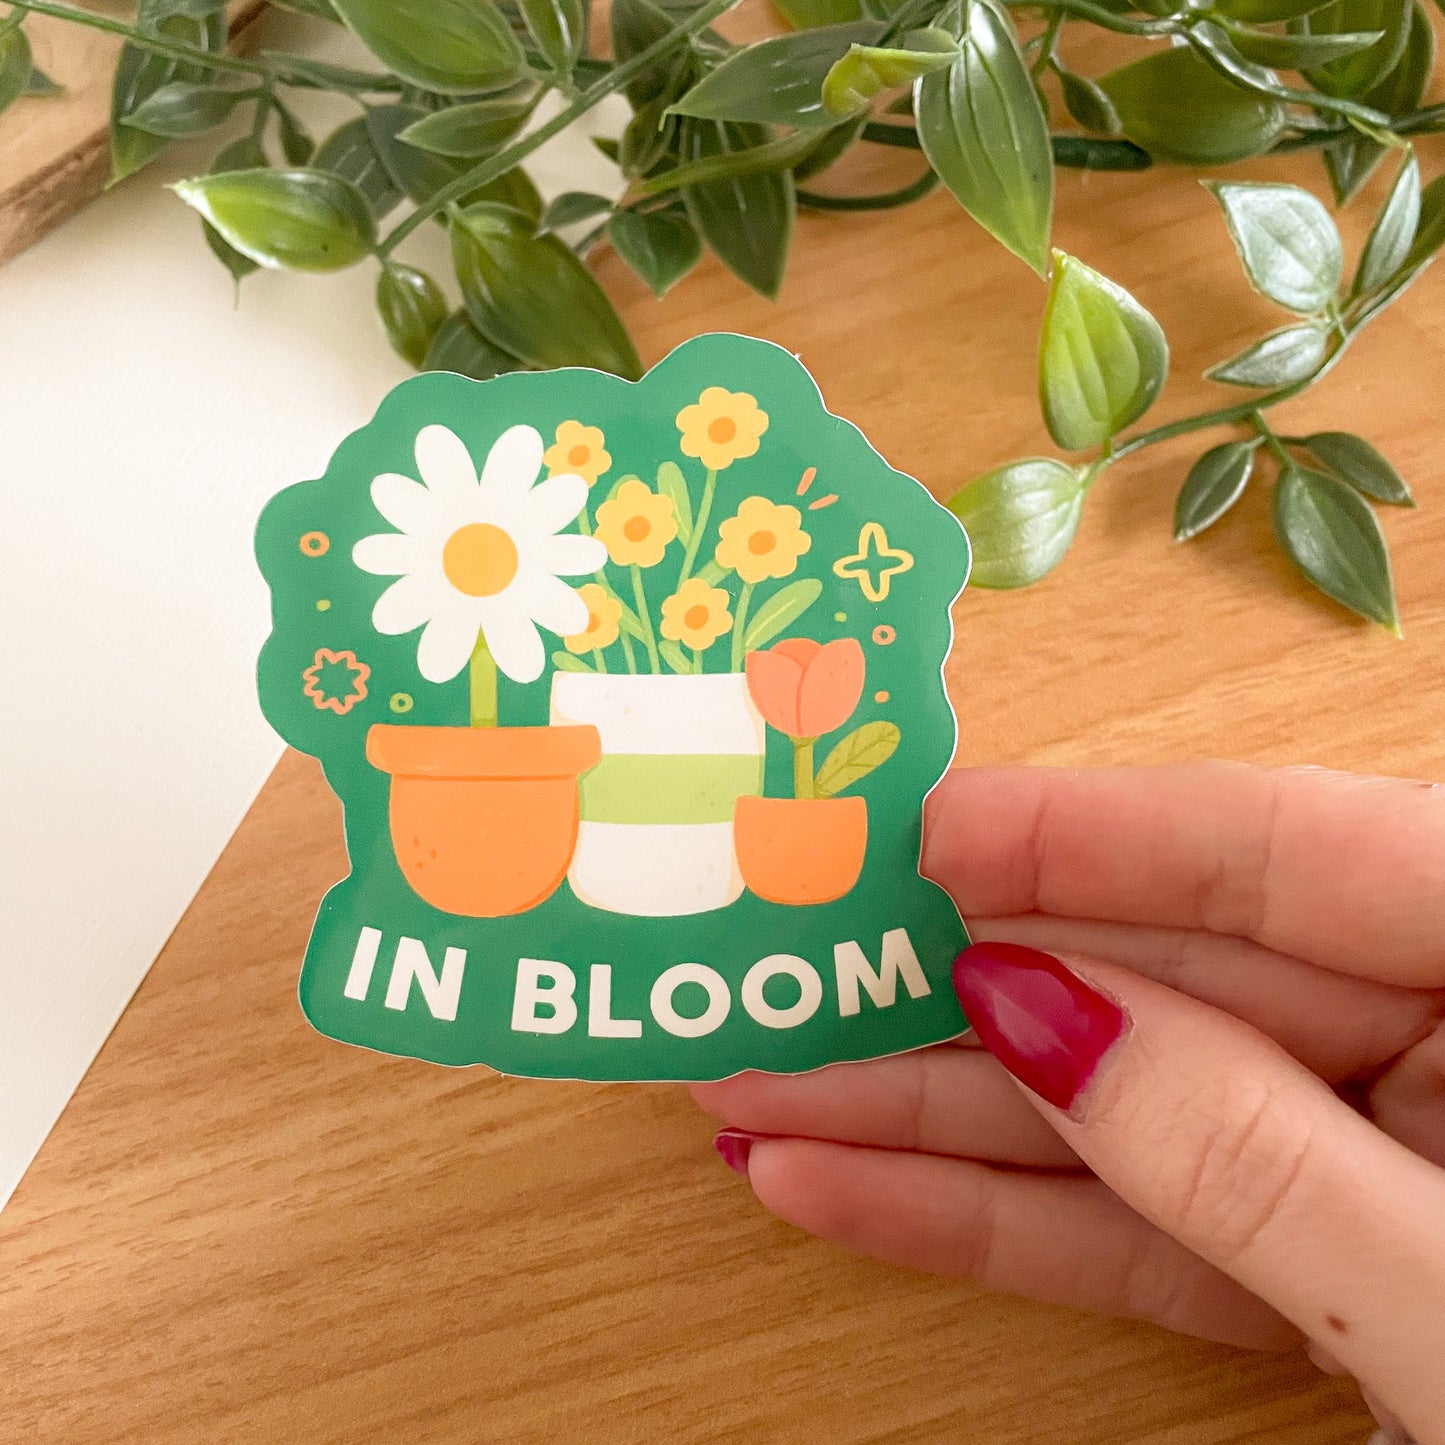 In bloom - Limited Edition Patreon Glossy Vinyl Sticker